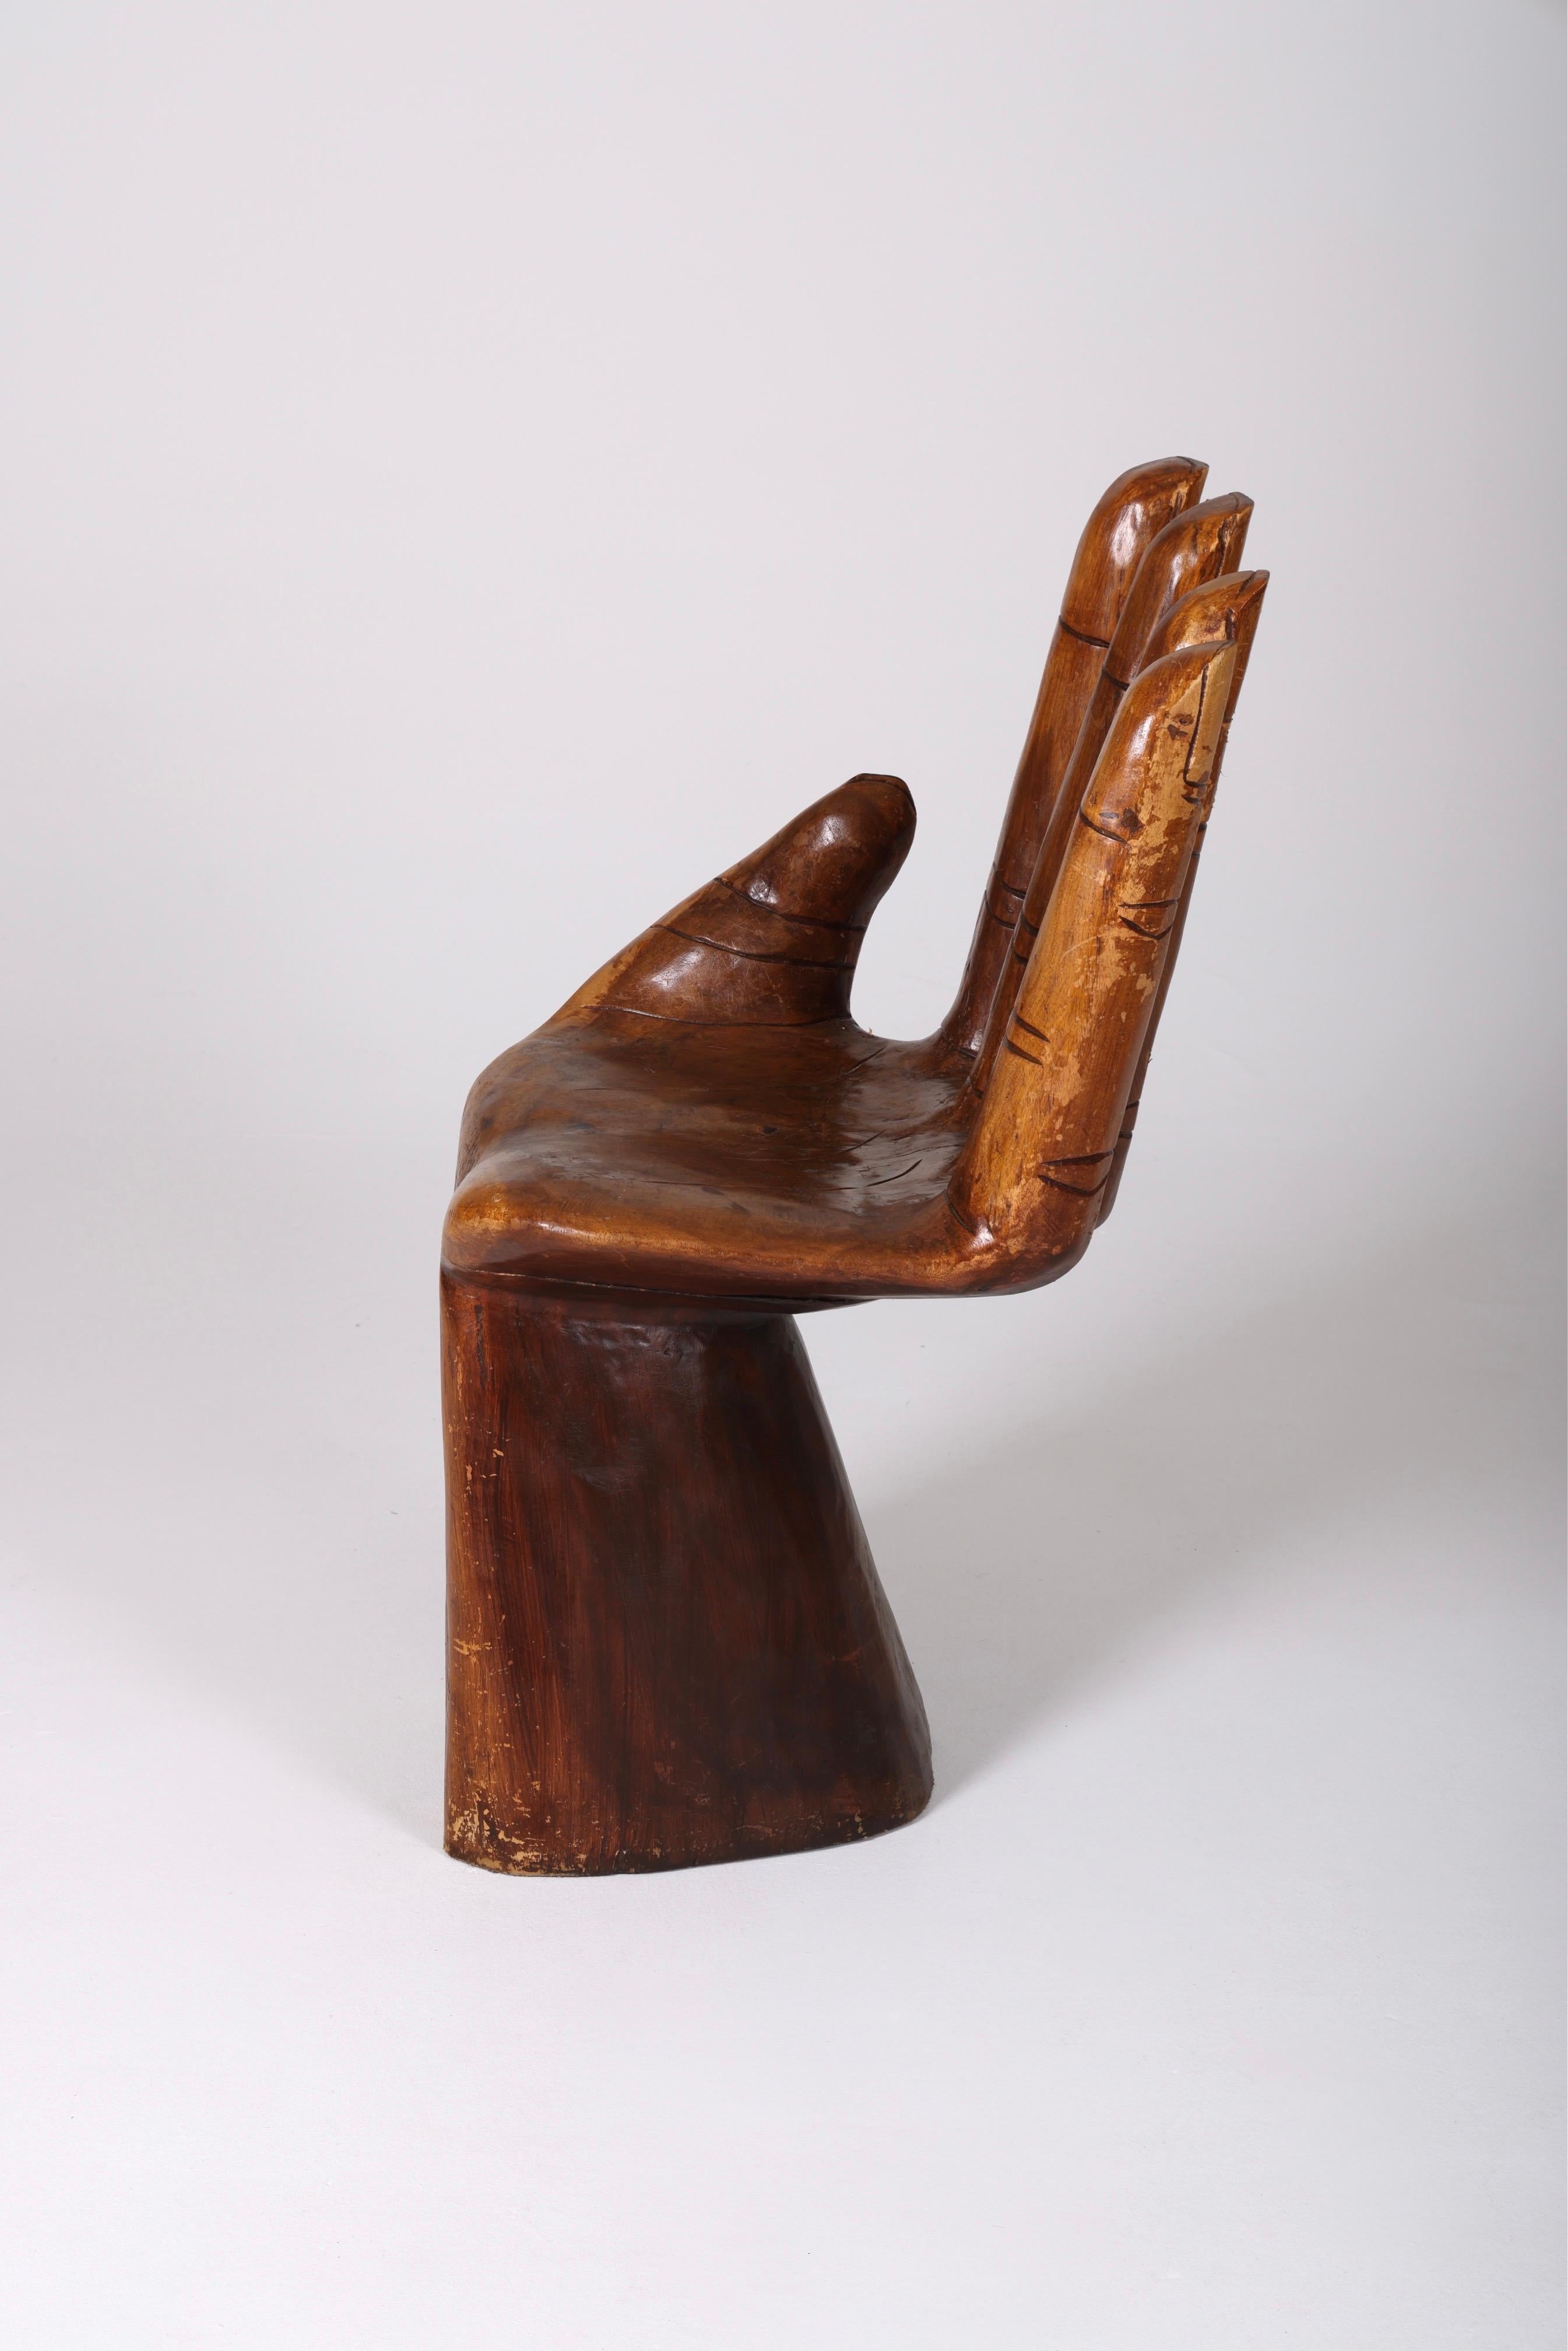 chair that looks like a hand